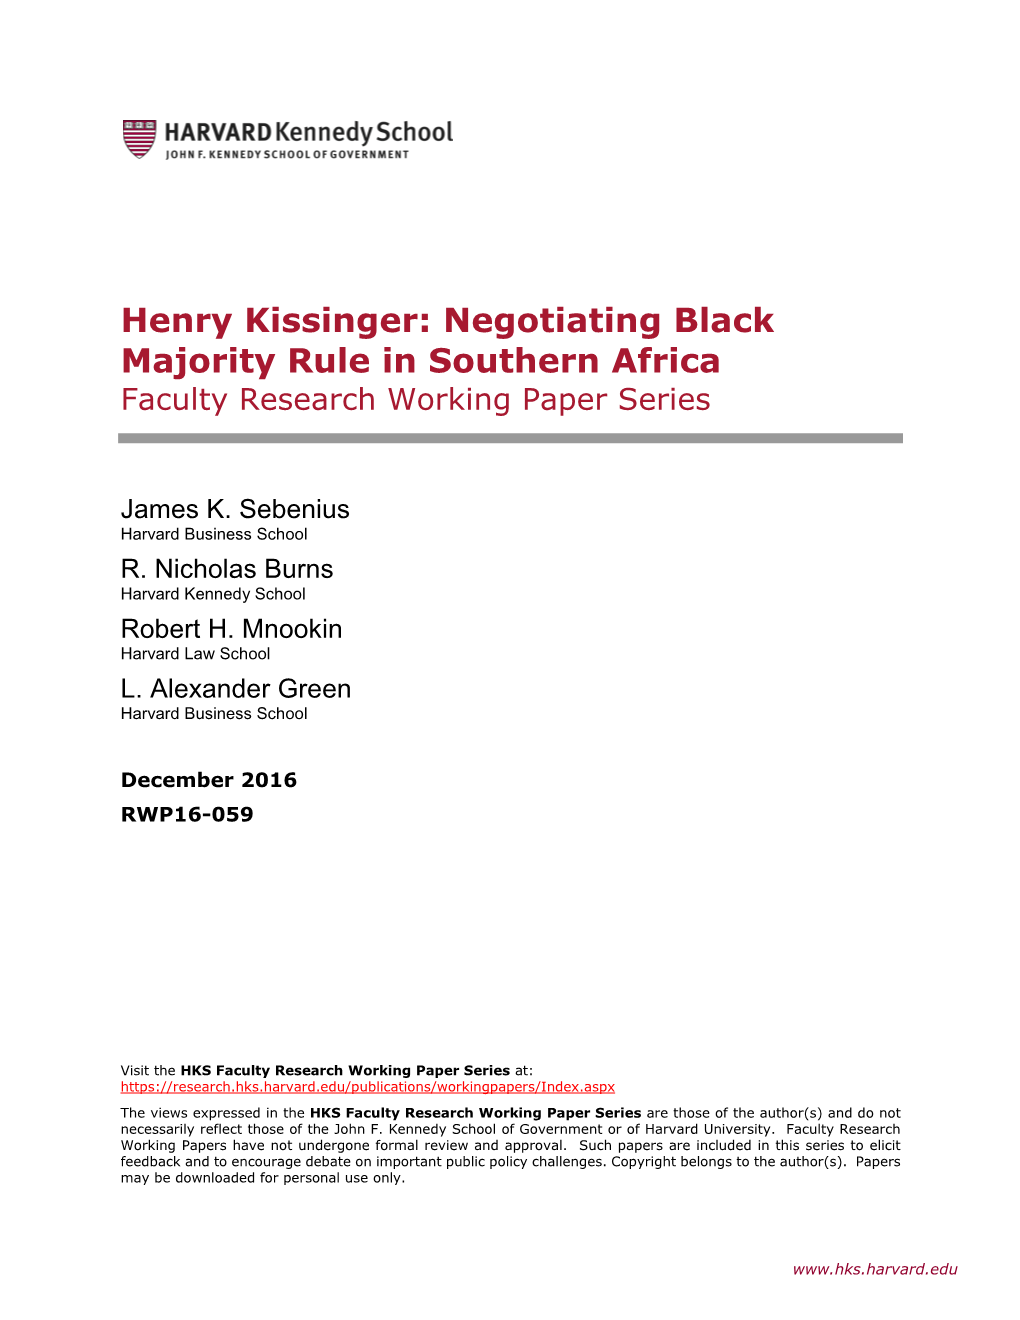 Henry Kissinger: Negotiating Black Majority Rule in Southern Africa Faculty Research Working Paper Series